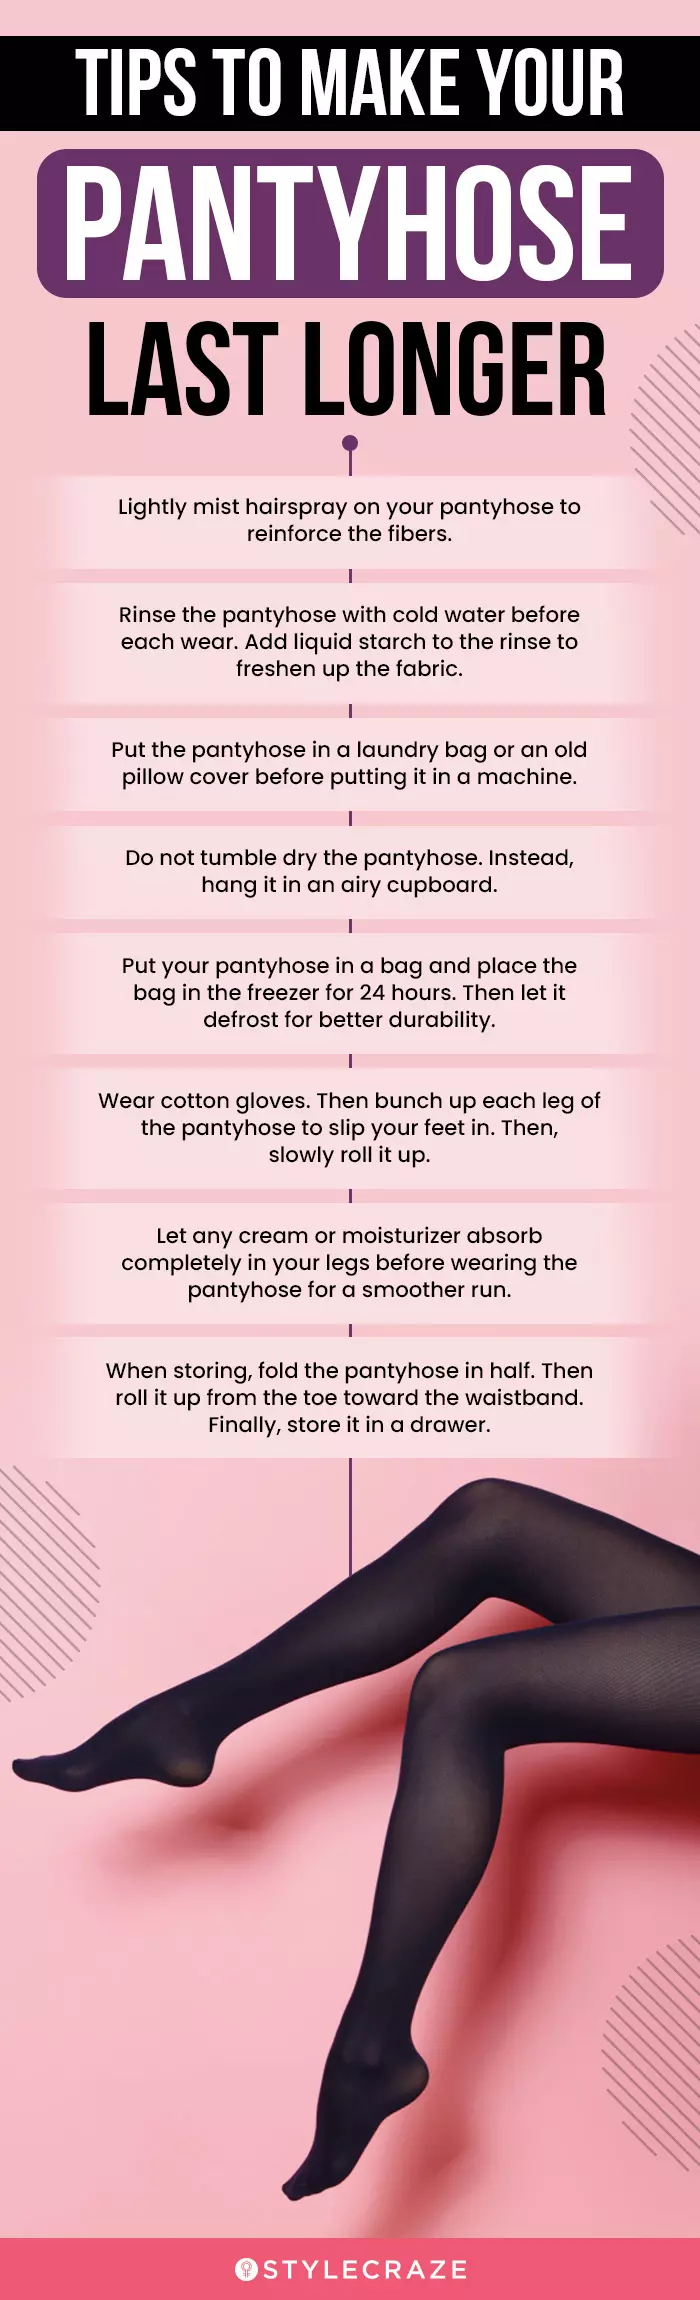 Tips To Make Your Pantyhose Last Longer (infographic)